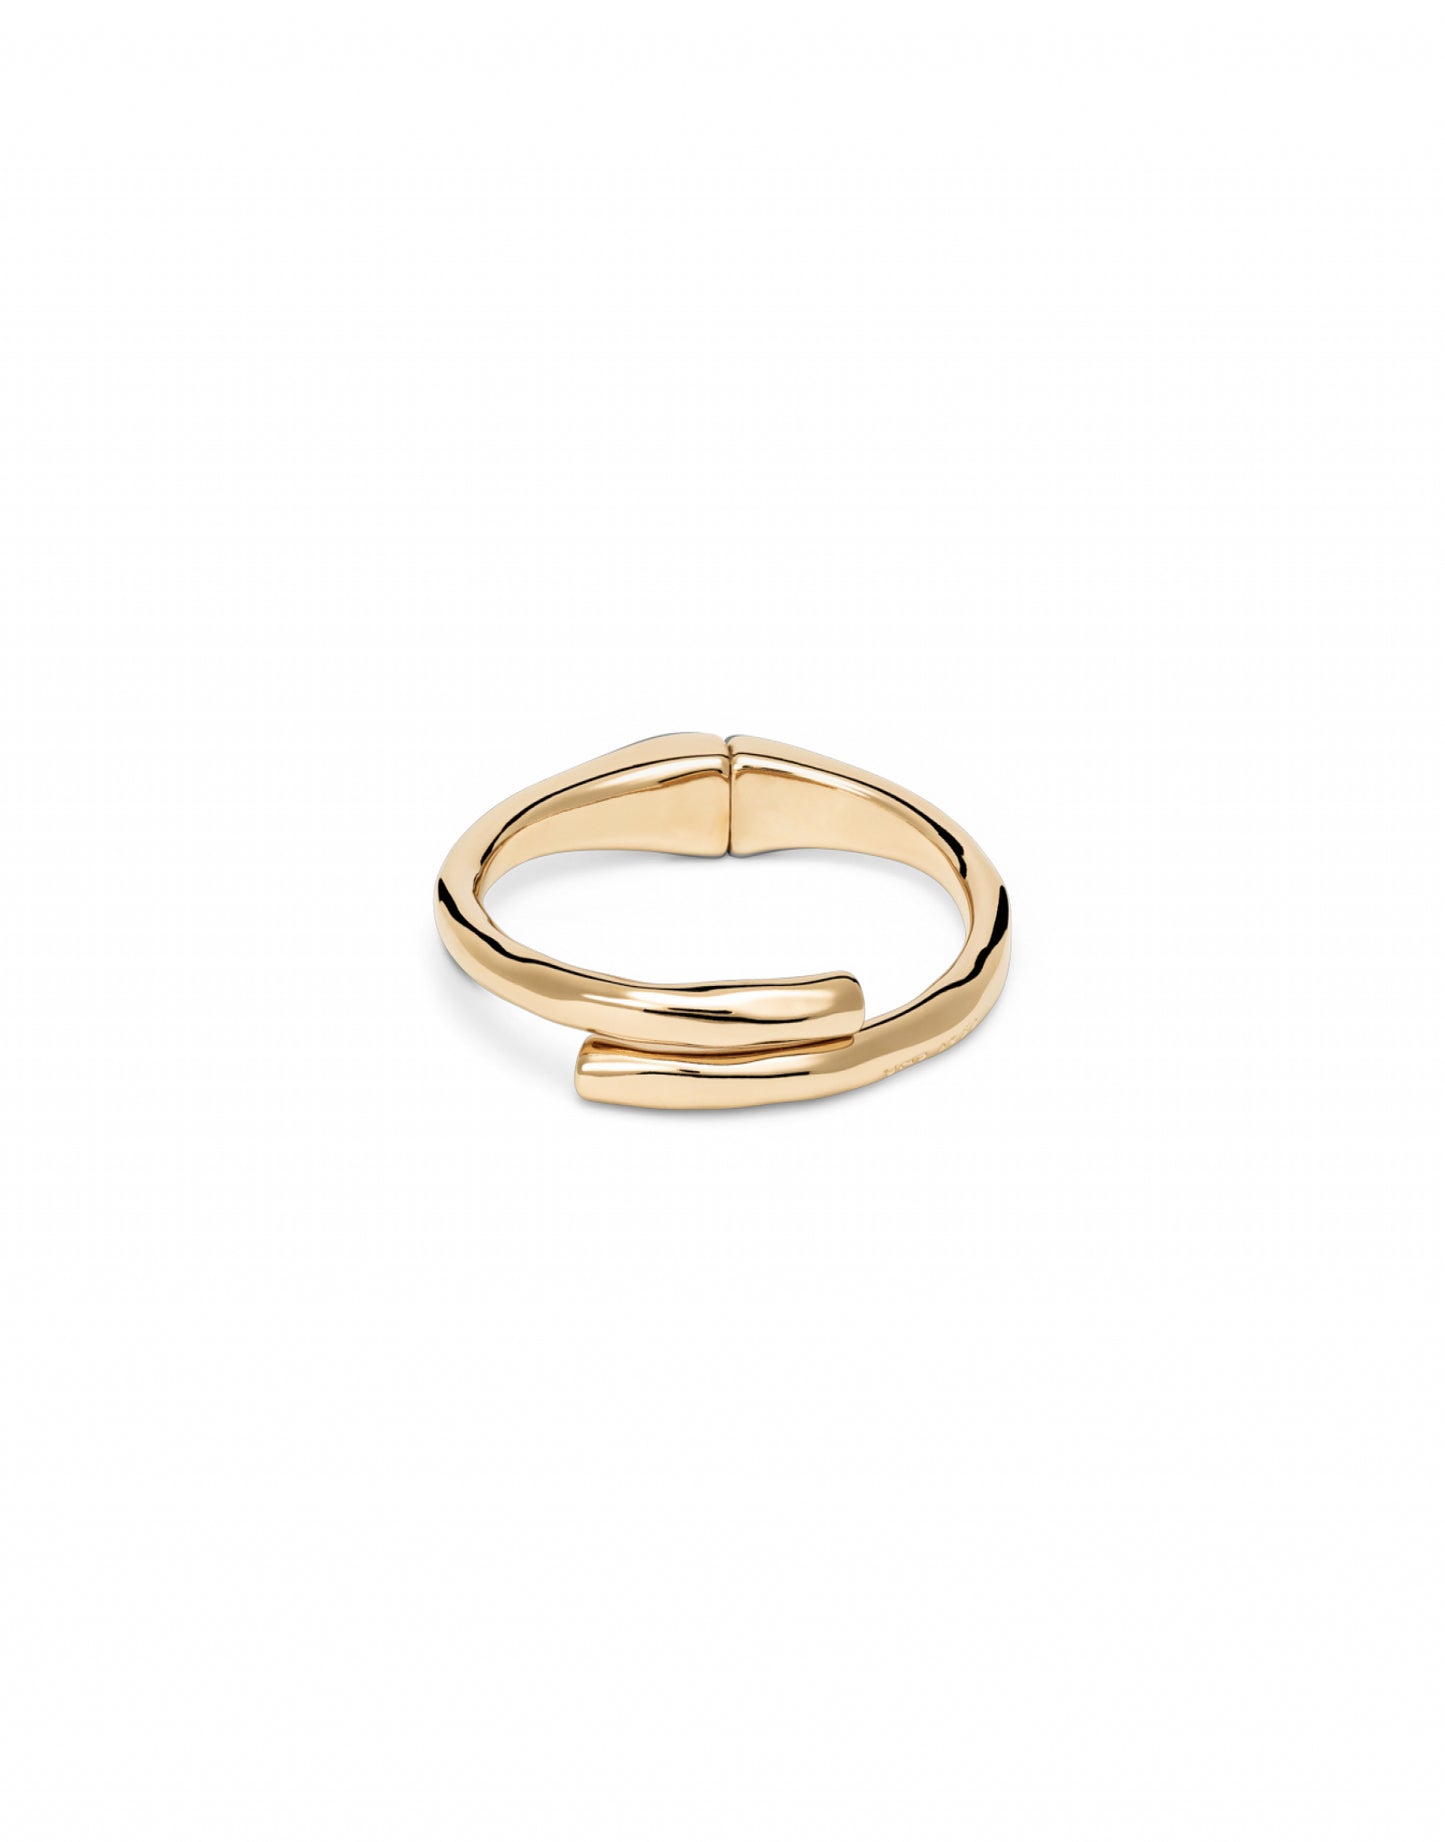 UNO DE 50 Unode50 - Gold Meeting Point Bracelet available at The Good Life Boutique